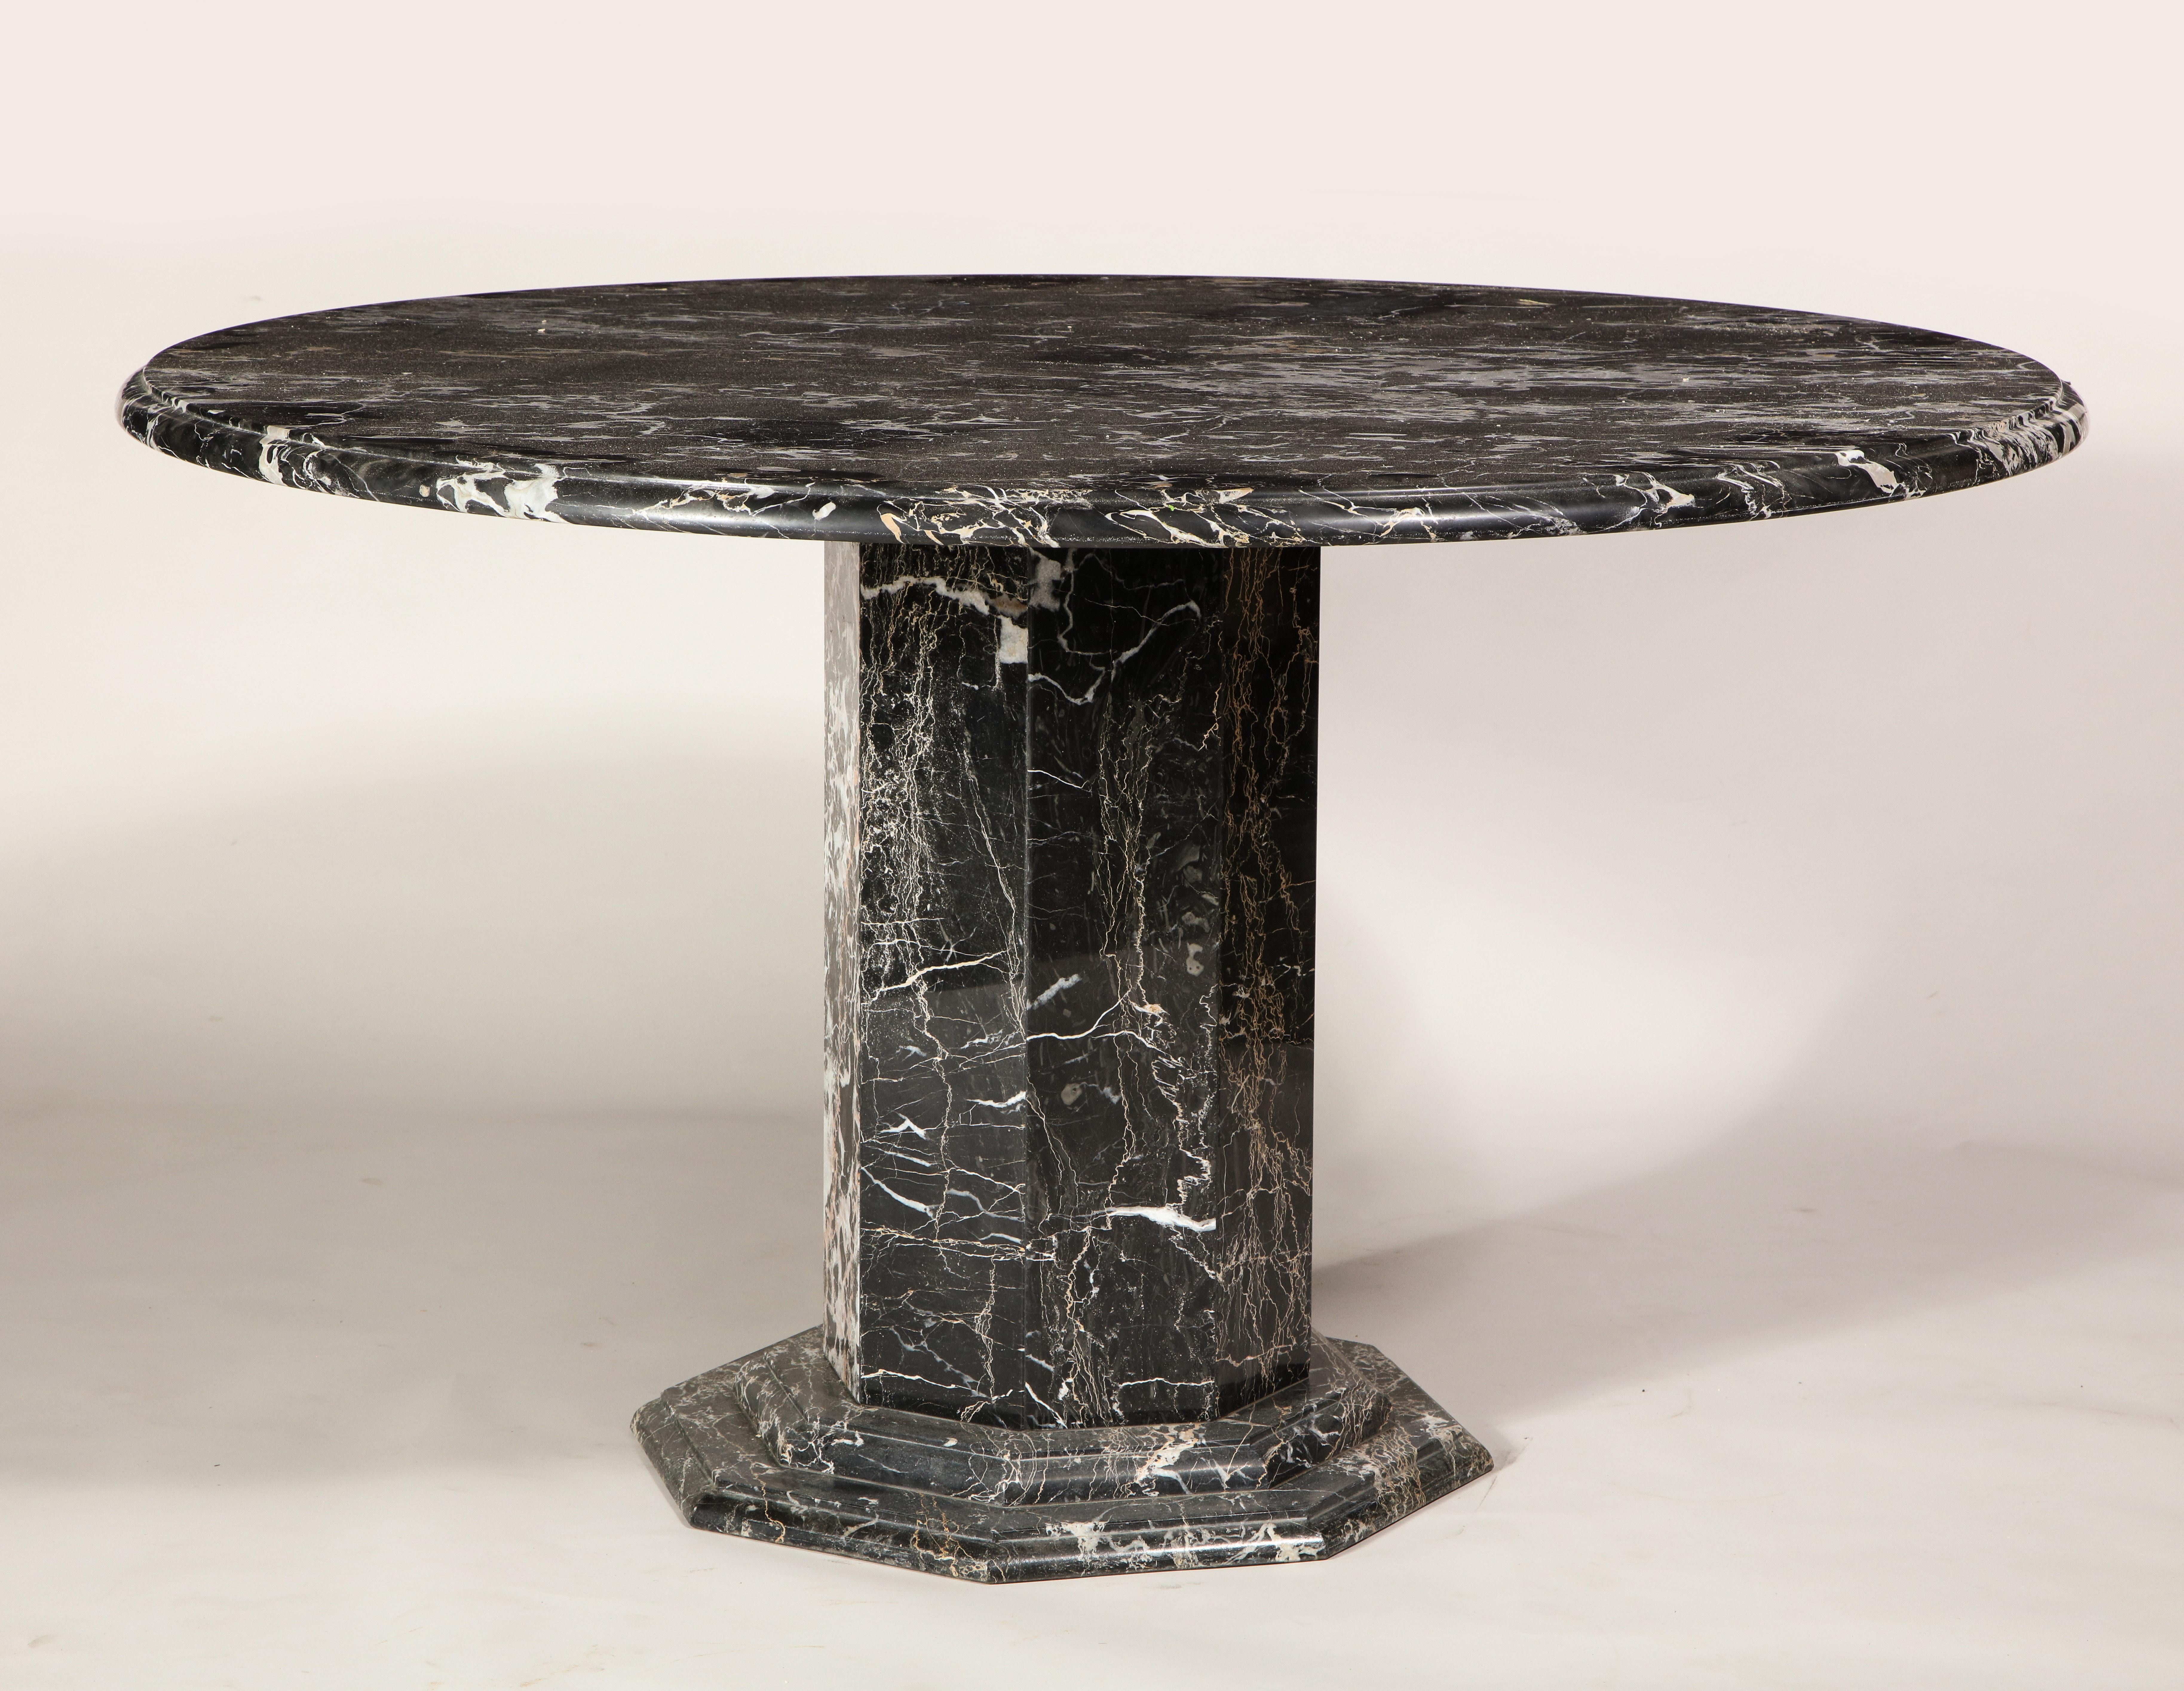 Portoro deco style black marble round centre, game dining, table, France, 1980s.

Beautiful dining or centre Table in black Portoro marble. Gold, white and black, France, 1980s. The table comes apart in two pieces for shipping. 
Imported from